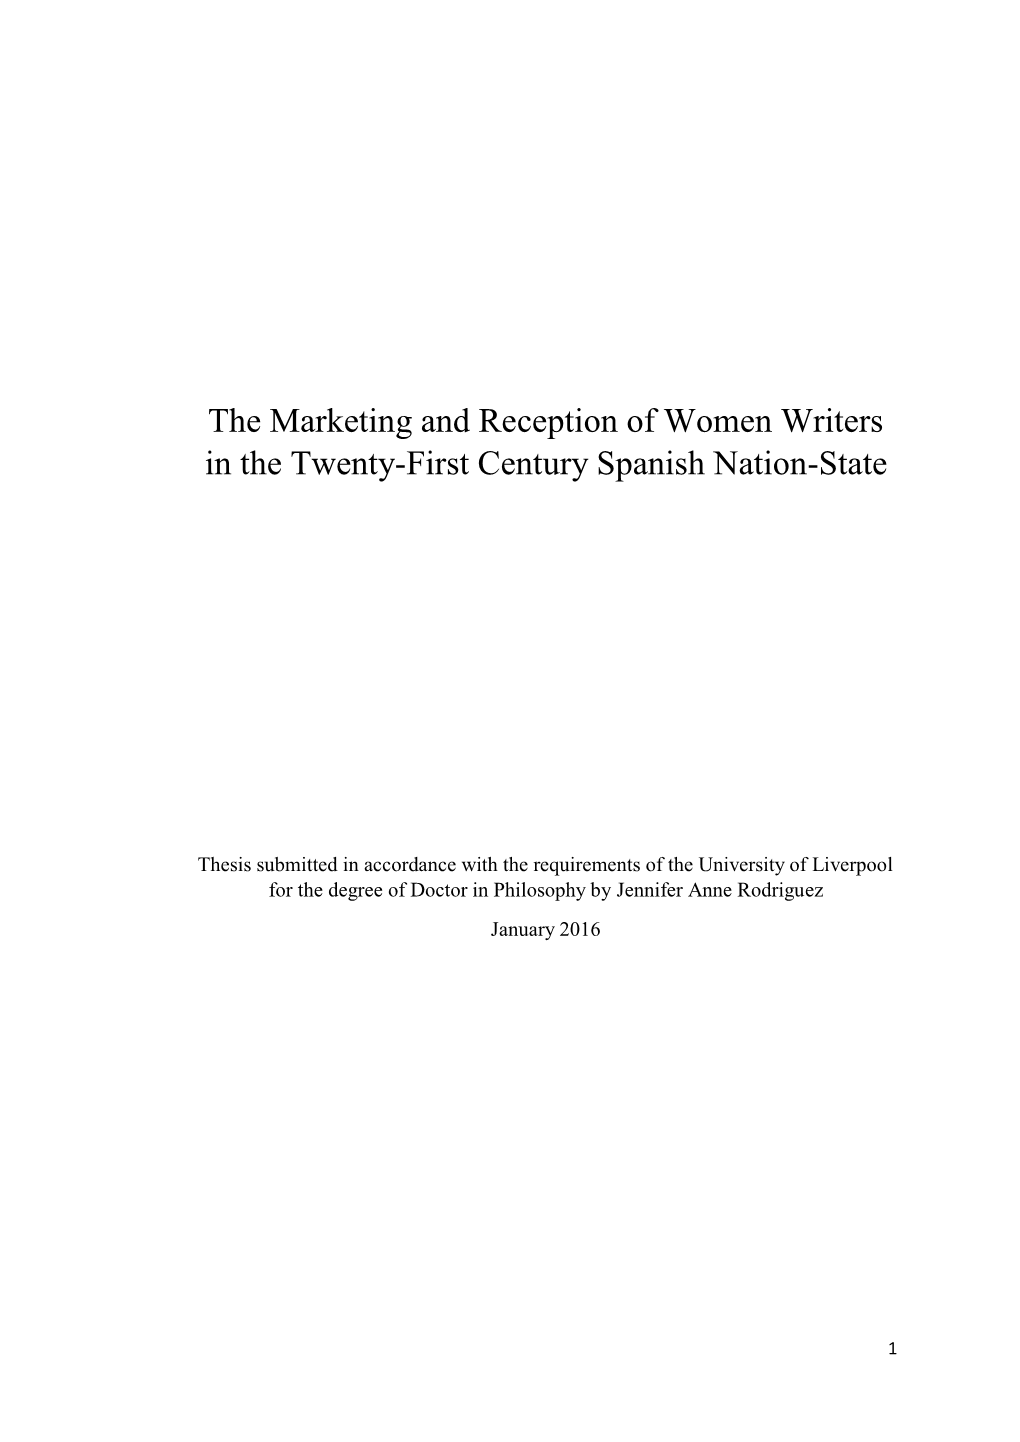 The Marketing and Reception of Women Writers in the Twenty-First Century Spanish Nation-State